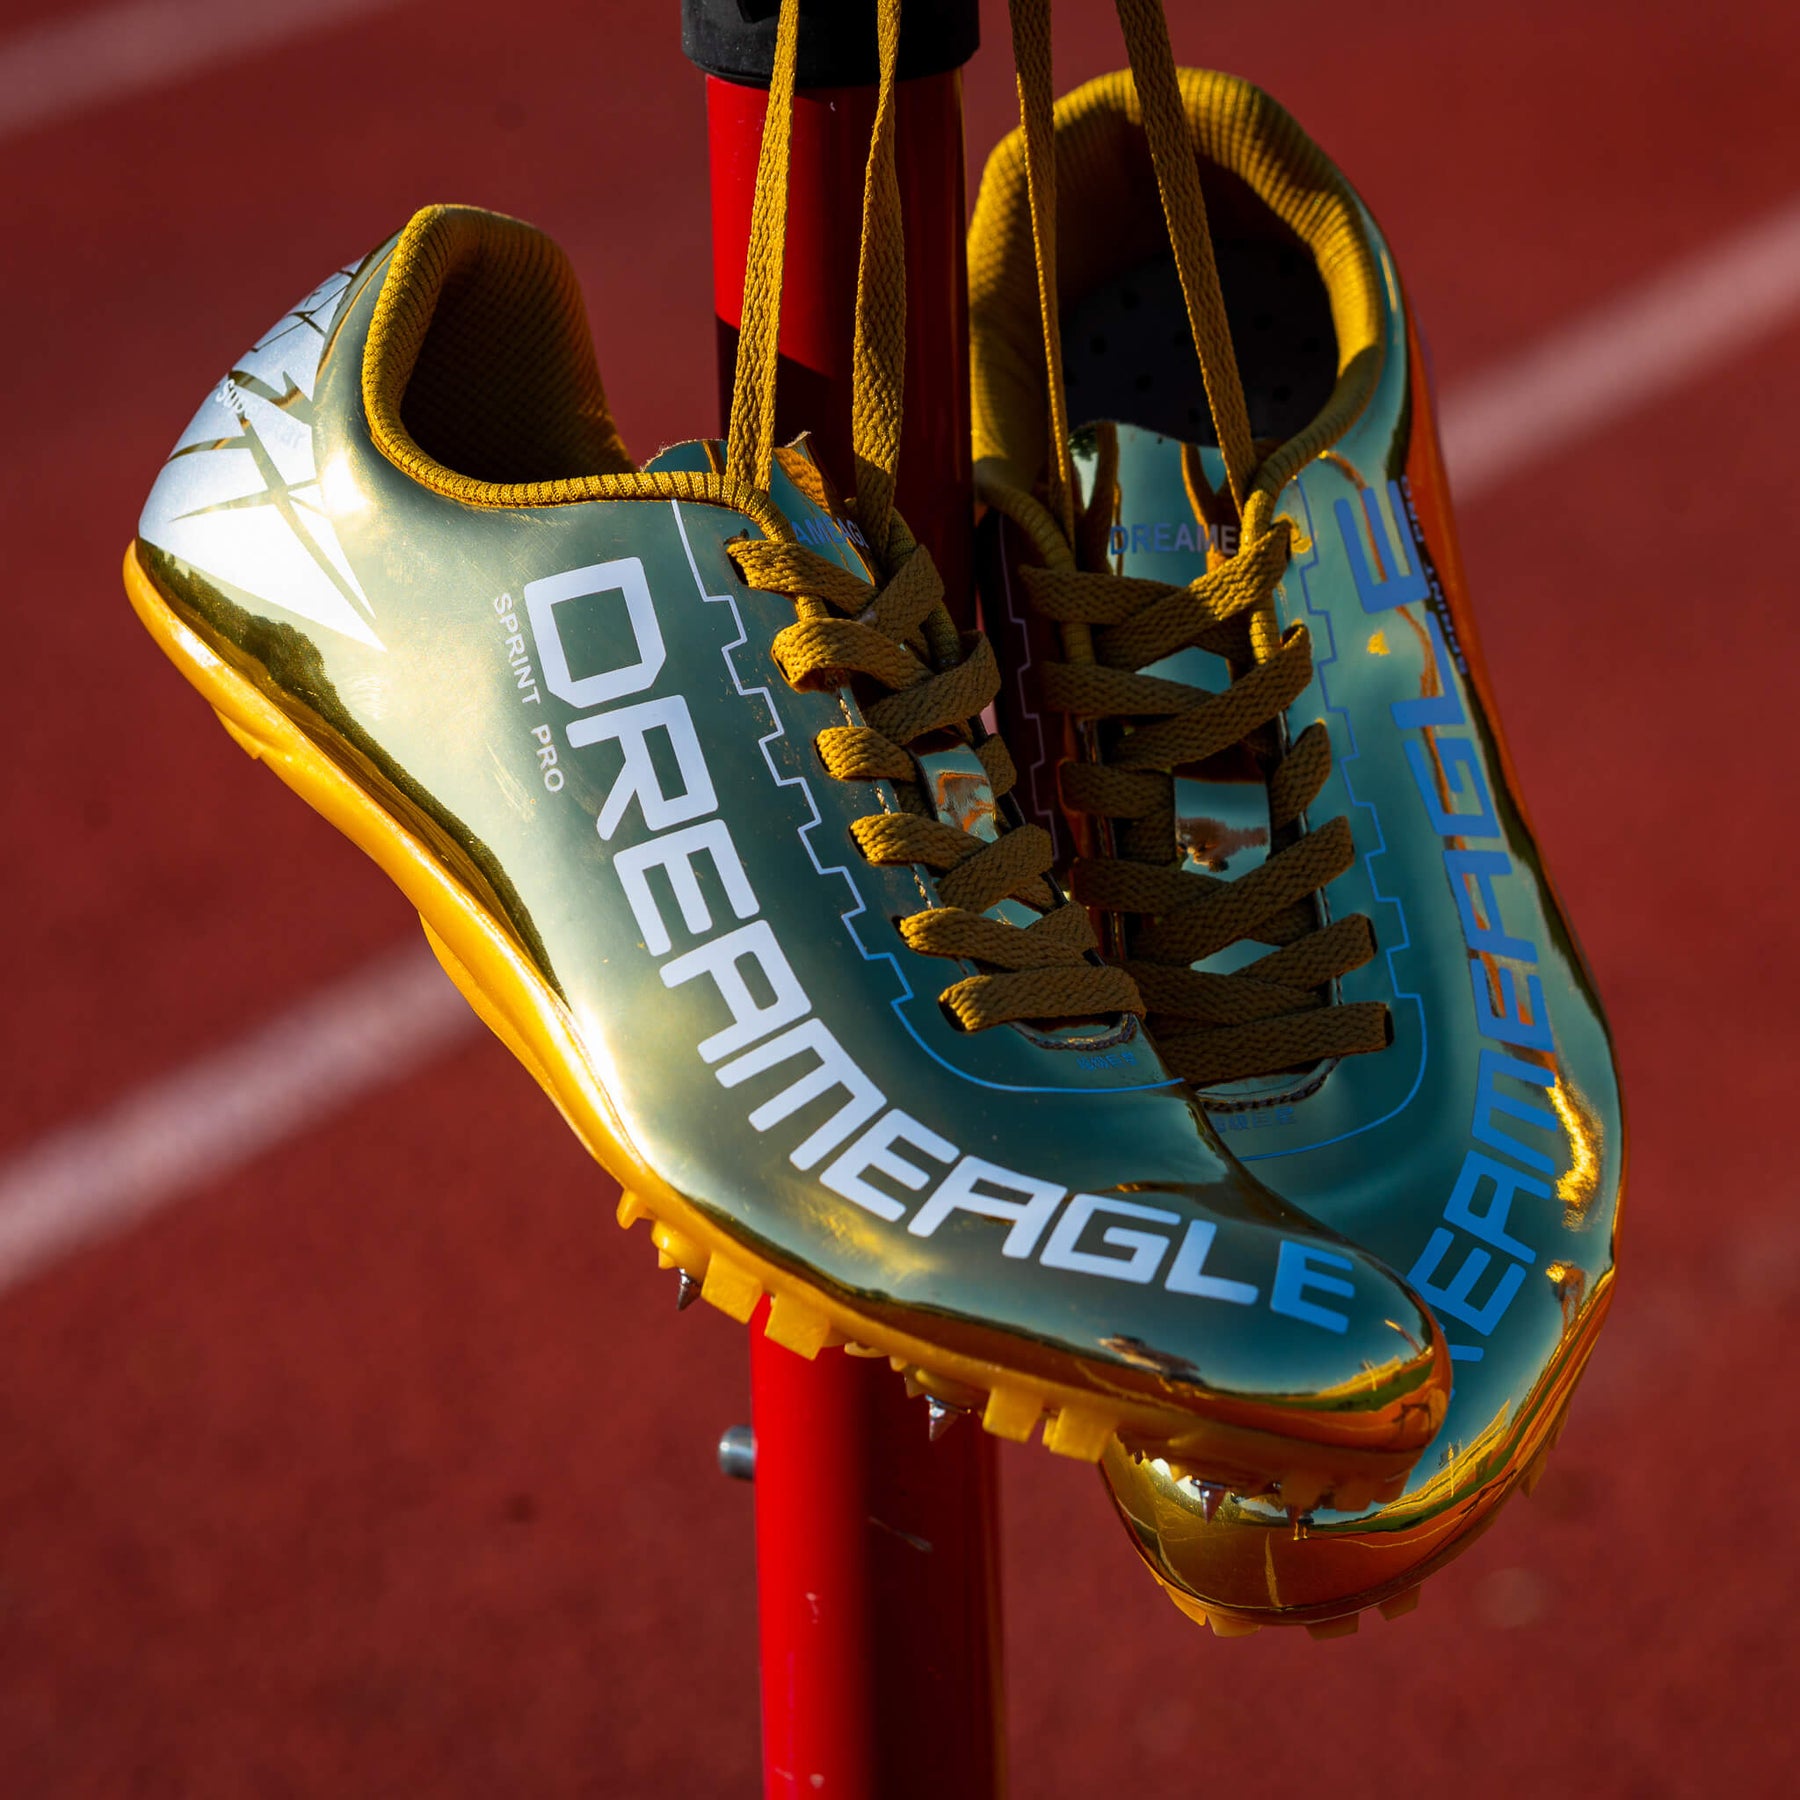 Gold Sprint Track Spikes